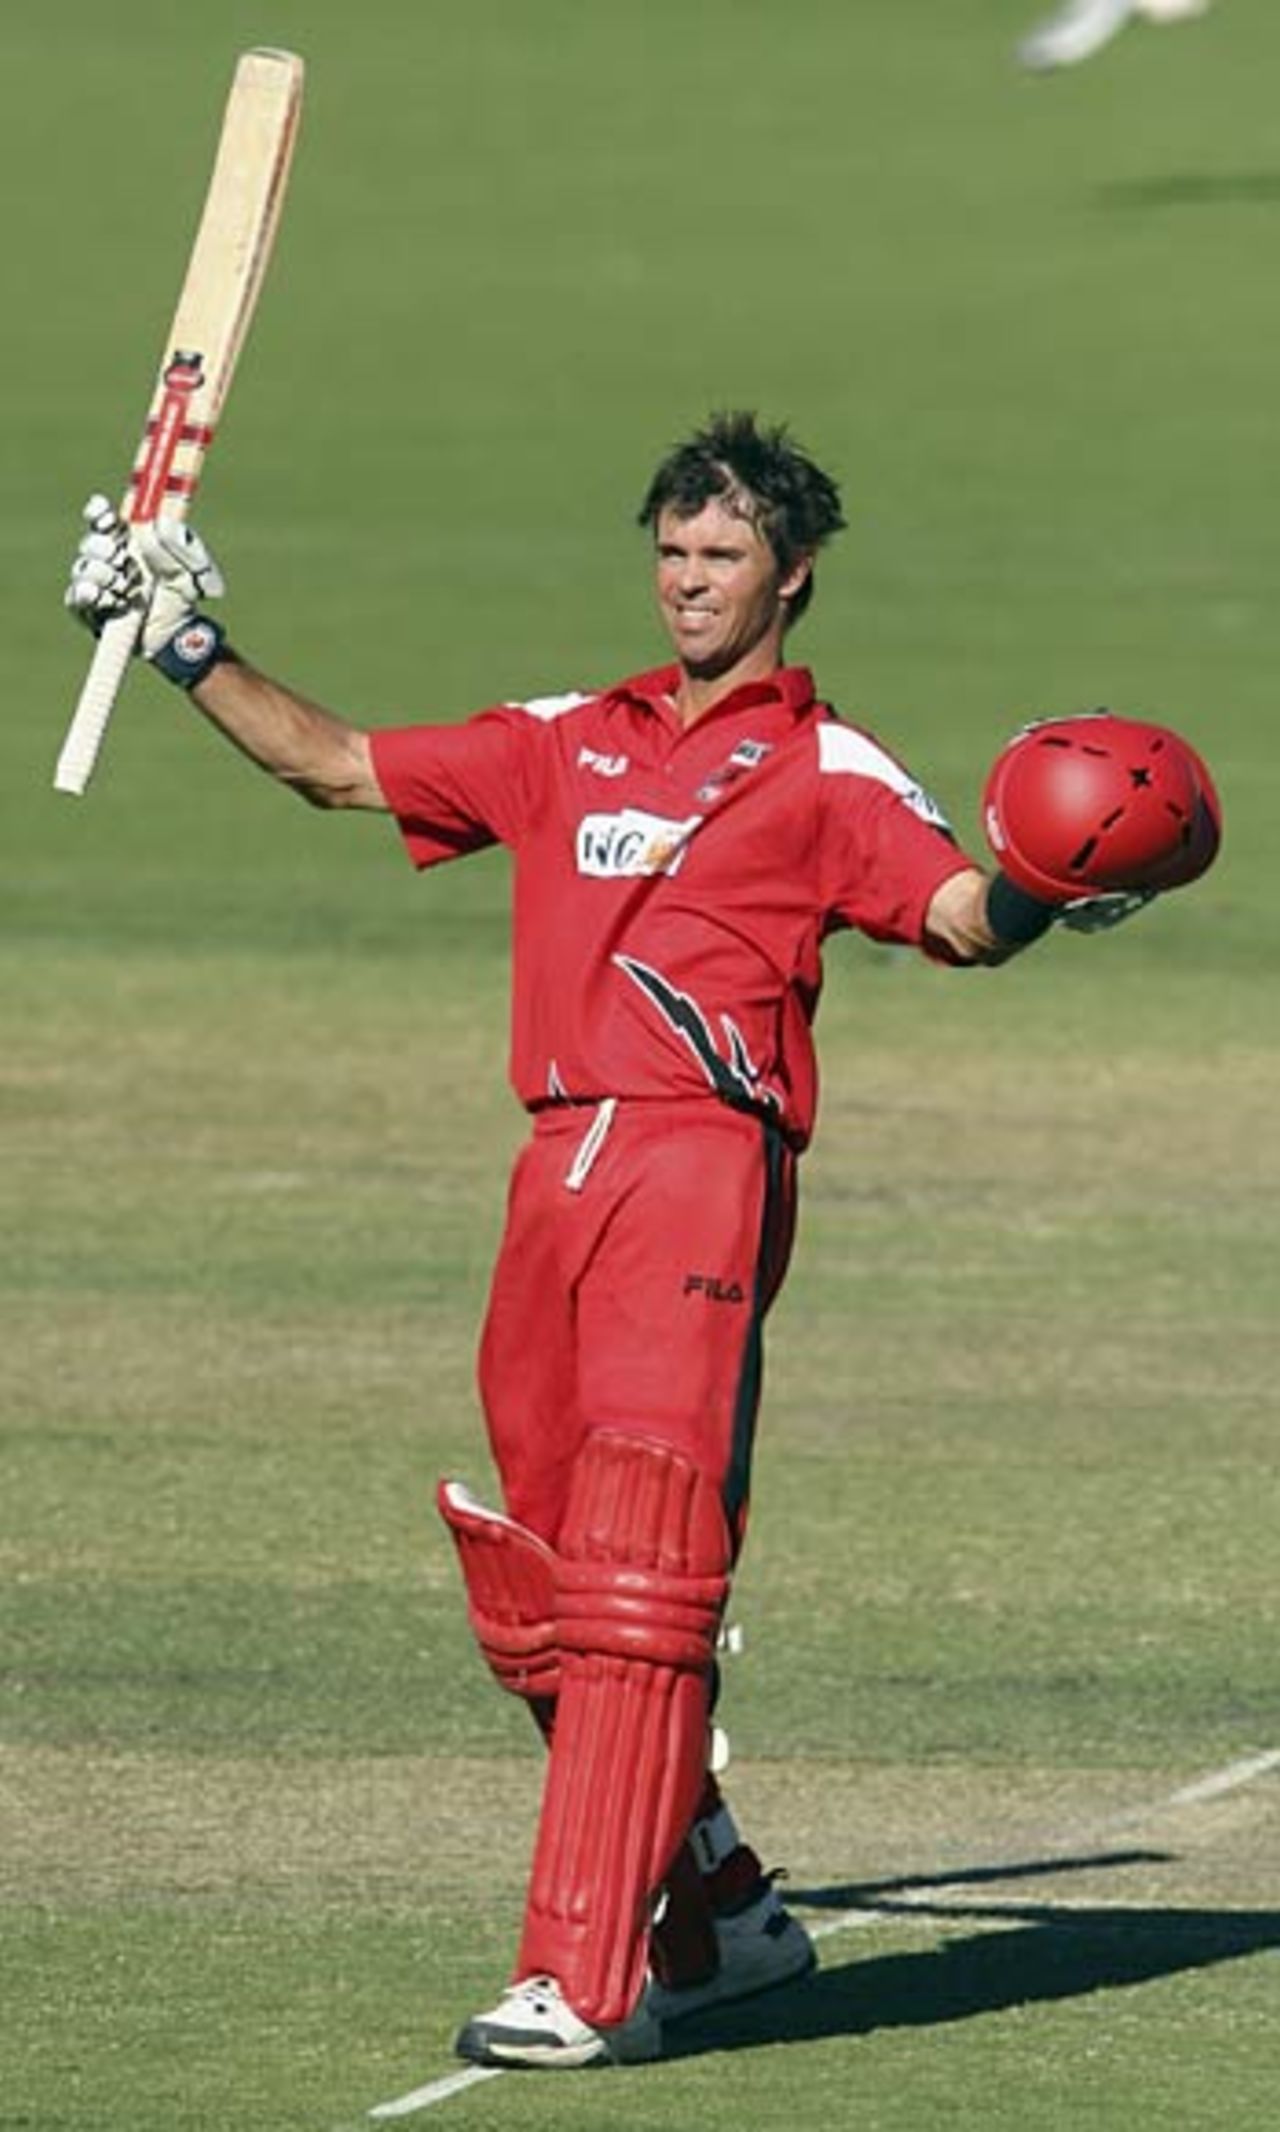 Greg Blewett reaches his hundred, South Australia v New South Wales, ING Cup, Adelaide, January 23, 2005